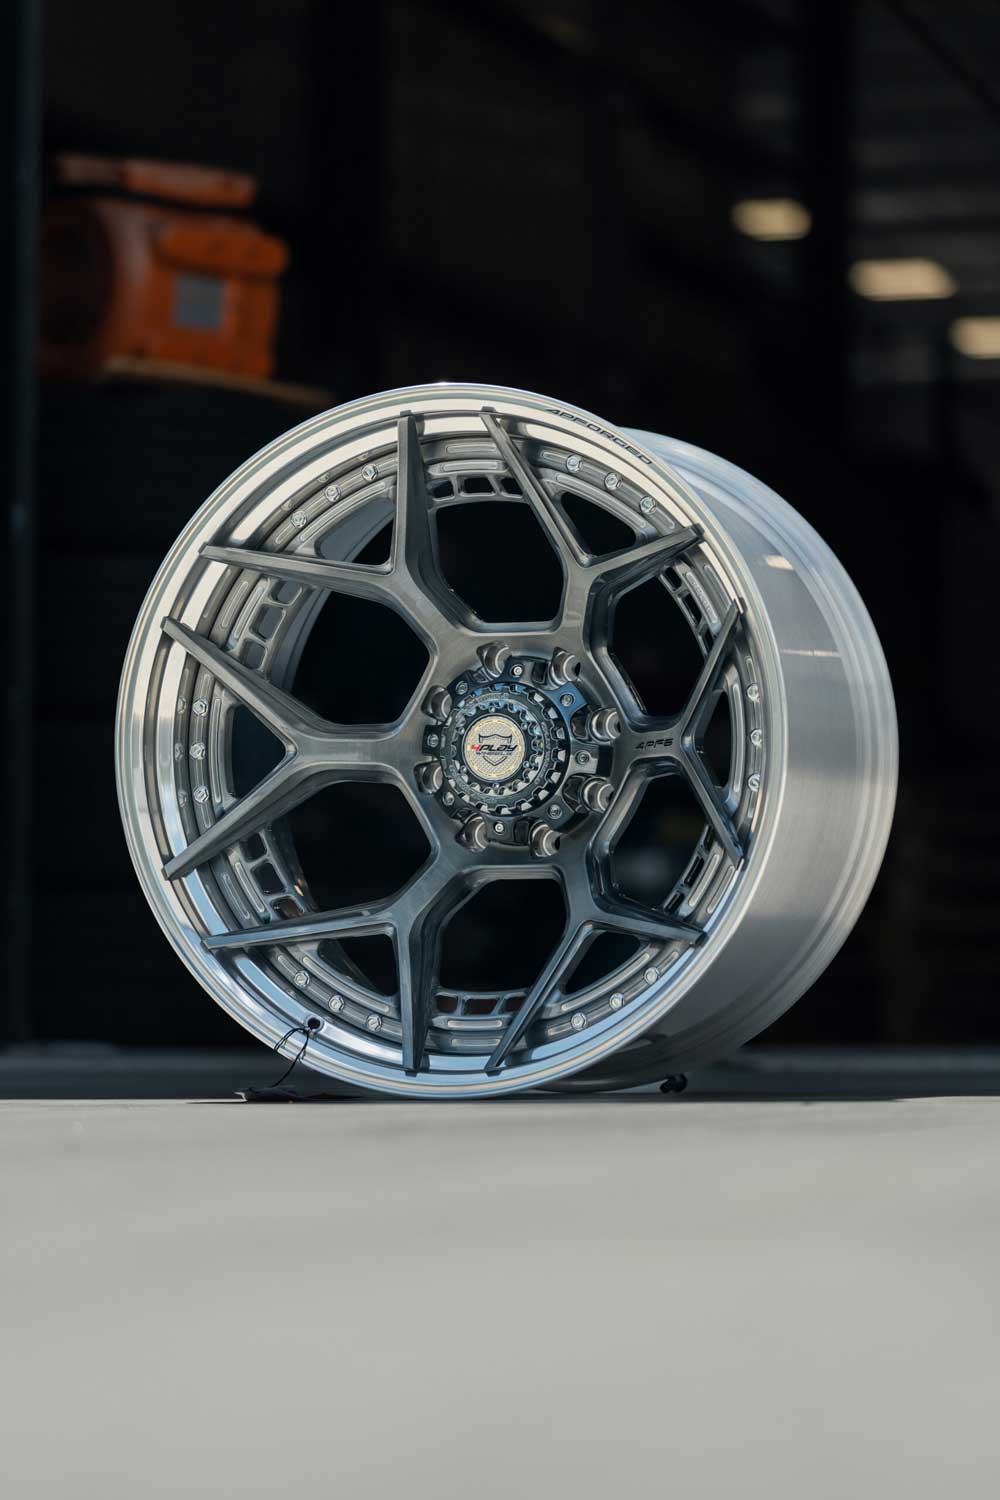 4PLAY WHEELS - 4PF6 Brushed / Tinted Clear Center & Polished Barrel